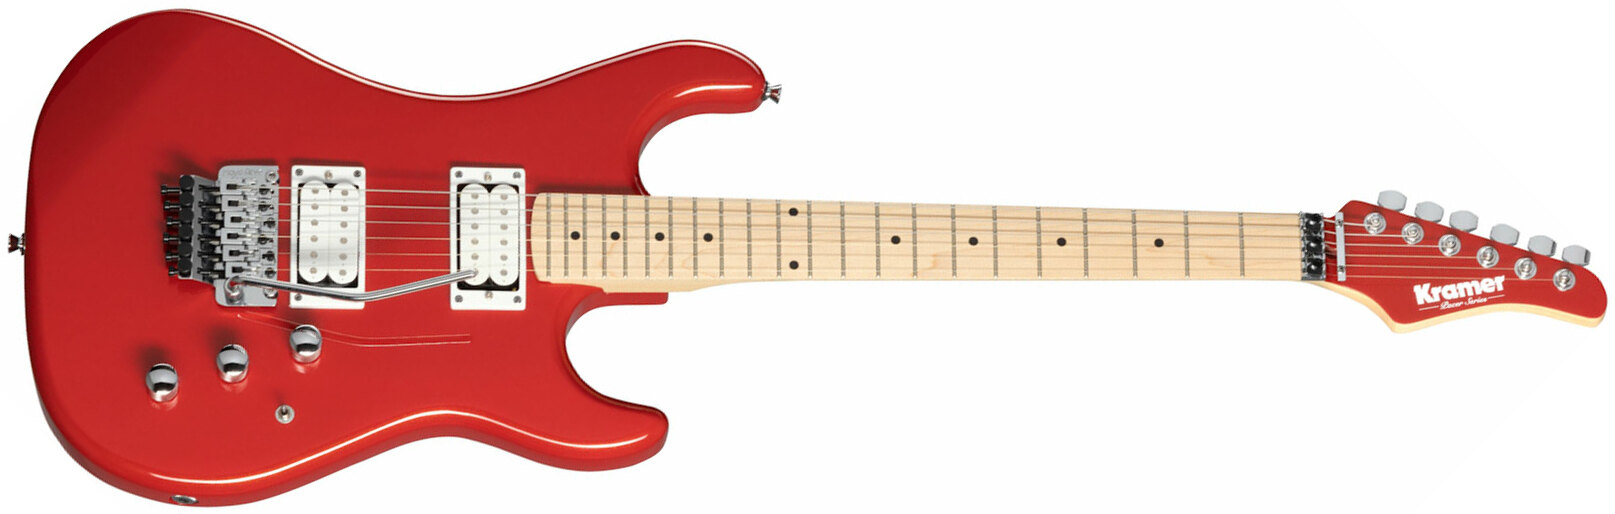 Kramer Pacer Classic 2h Fr Mn - Scarlet Red Metallic - Str shape electric guitar - Main picture